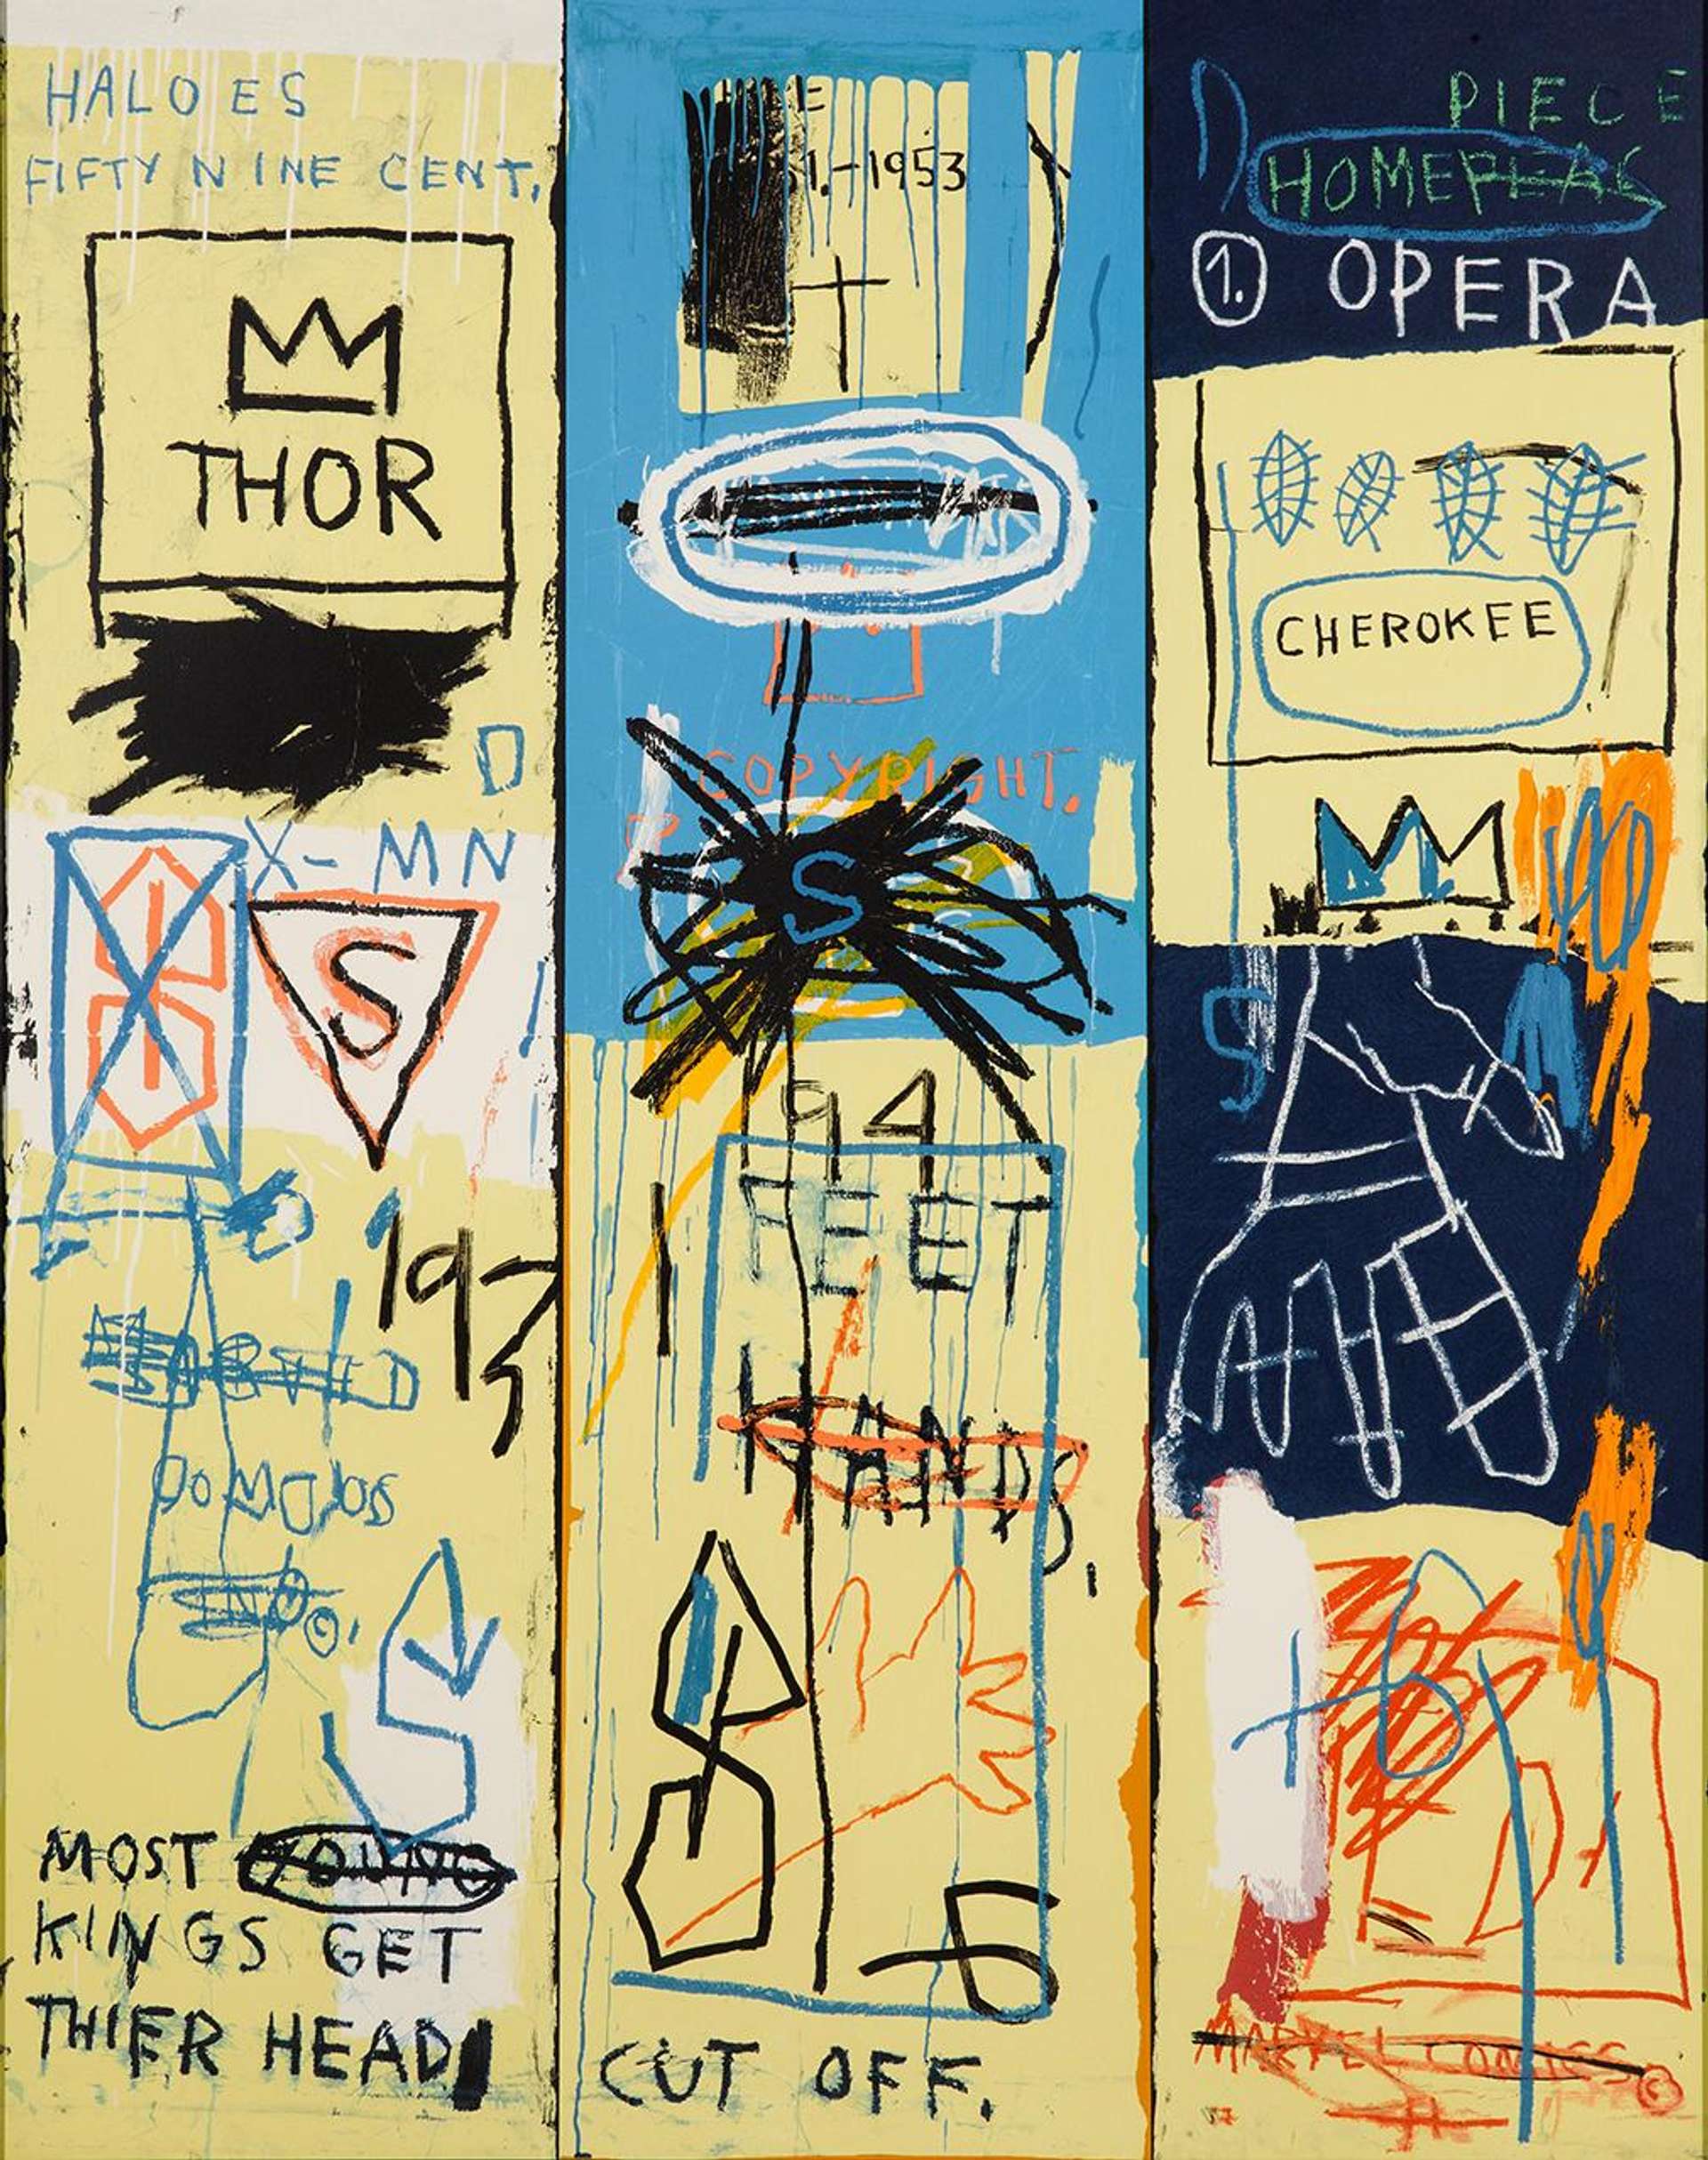 A colourful, graphic portrait painting titled "Charles The First" by Jean-Michel Basquiat, 1982, featuring a rough grid of random sketches and letters, against an abstract background of graffiti-style markings.